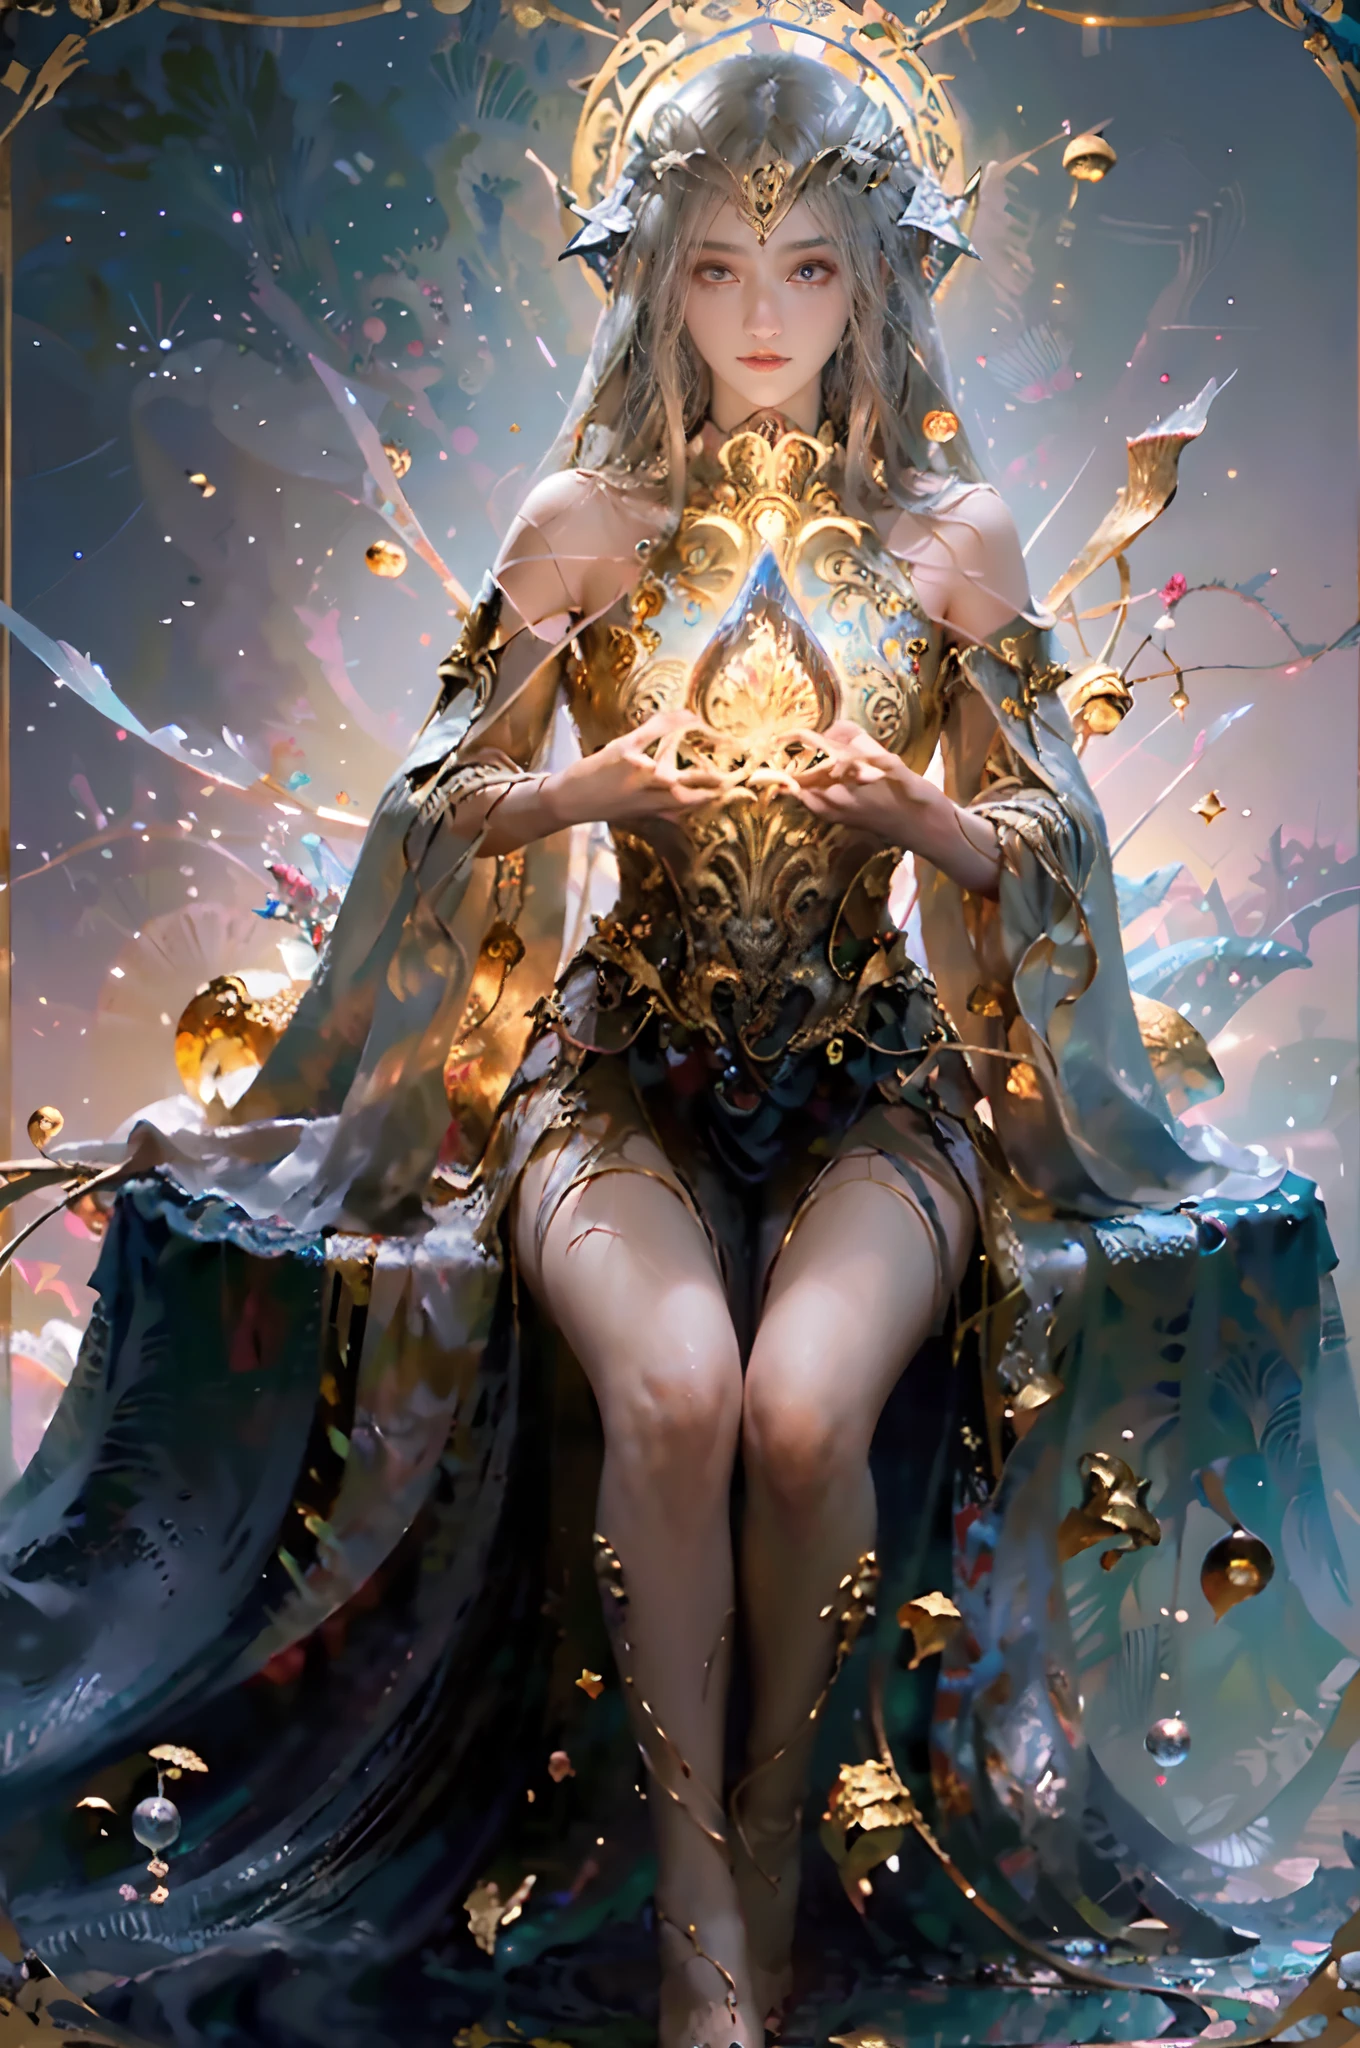 tarot cards，Full tarot border，(The image is surrounded by a tarot card-style border:1.8), (Masterpiece, High quality, Best quality, offcial art, Beauty and aesthetics:1.2),(theelementoffire:1.4),（1 young woman：1.6）,Composed of fire elements，Highly realistic,posing elegantly,Transparency,Sci-fi lighting effects,dress,Flame,hoang lap，climaxing，，brown  hair，best qualtiy，tmasterpiece，（realisticlying：1.4），RAW photos，vibrant with colors，Flow and movement。salama，hilltop，Great giants，Sexy gesture，Barefoot，without wearing shoes，palp，bubble，Deep background，Fantastic and incredible，Epic composition，(Complicated details，Hyper-detailing:1.2)，art  stations，（tmasterpiece，best qualtiy）surrealism, shadowing, anaglyph, stereograms, angle of view, Cinematic lighting, 8K, Super detail, ccurate, Best quality, A high resolution, Award-Awarded, Anatomically correct，Burning body，Elaborate Eyes，delicated face，Right eyes，long layered silvery white hair，Black cape，lots of flames，Buble, shells, Fish, pearls，Nautilus，a plant，jelly fish，The corals，Vintage style，（zentangle，datura，Tangles，entangled）， (s fractal art: 1.3)，holy rays，gold foil，Gold leaf art，glitter drawing，Full tarot border，（Full border 1.5），Fang Yi，